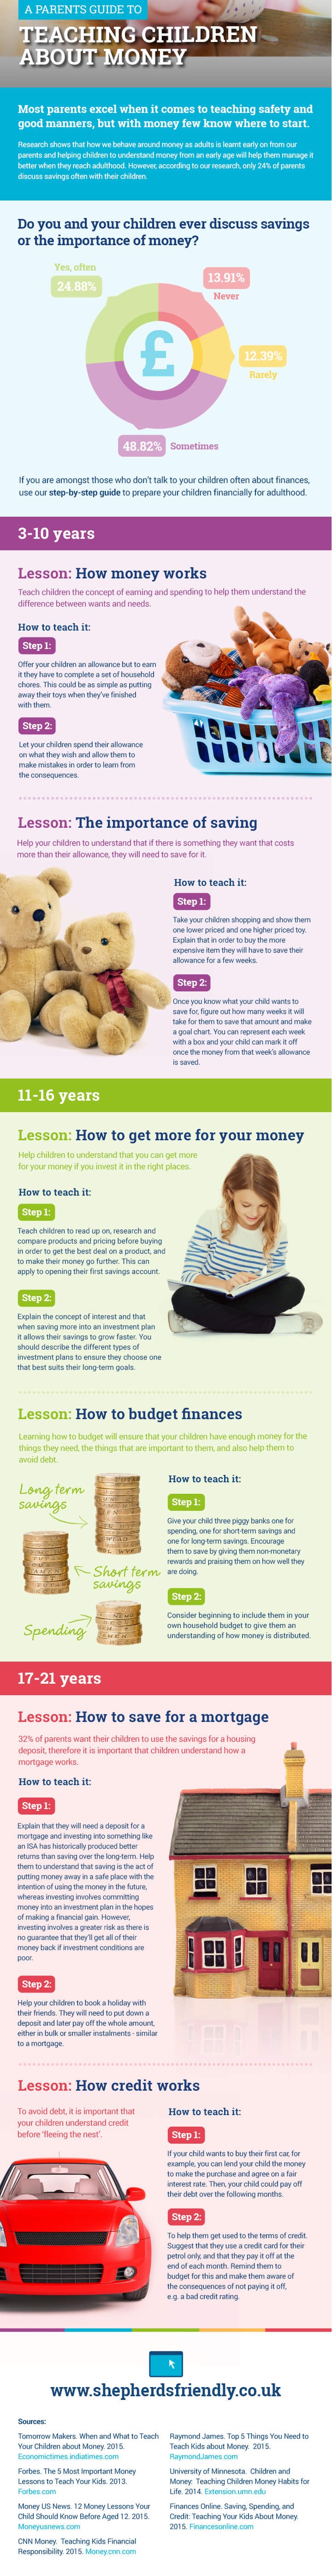 how-to-teach-your-child-about-money-management2